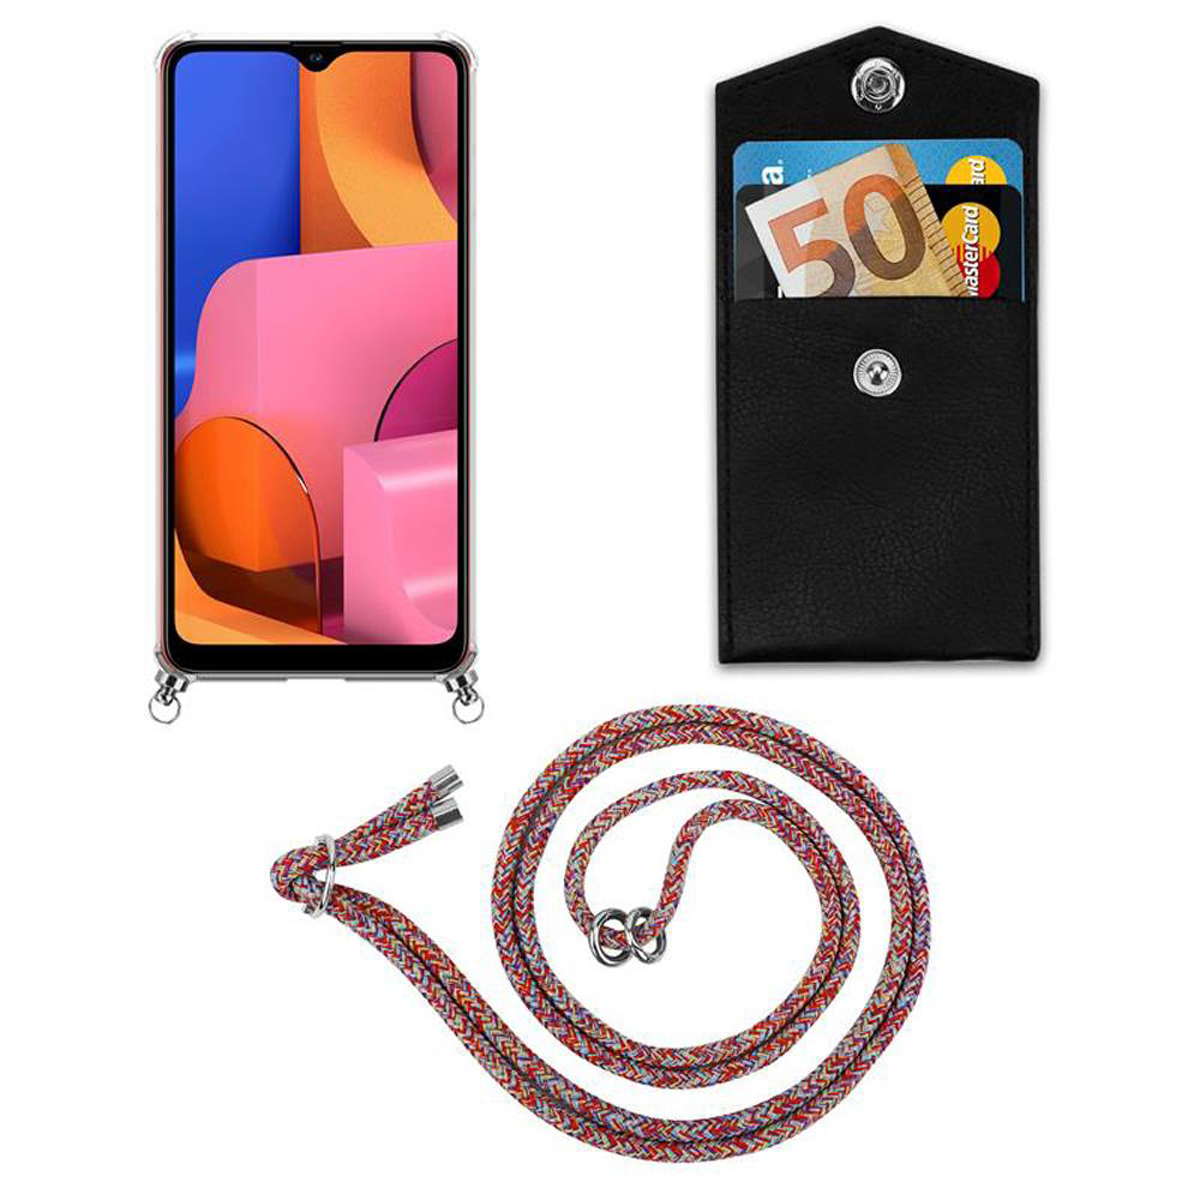 A21, Backcover, Samsung, Kette Hülle, PARROT Kordel und Handy CADORABO Silber COLORFUL mit Ringen, Galaxy abnehmbarer Band